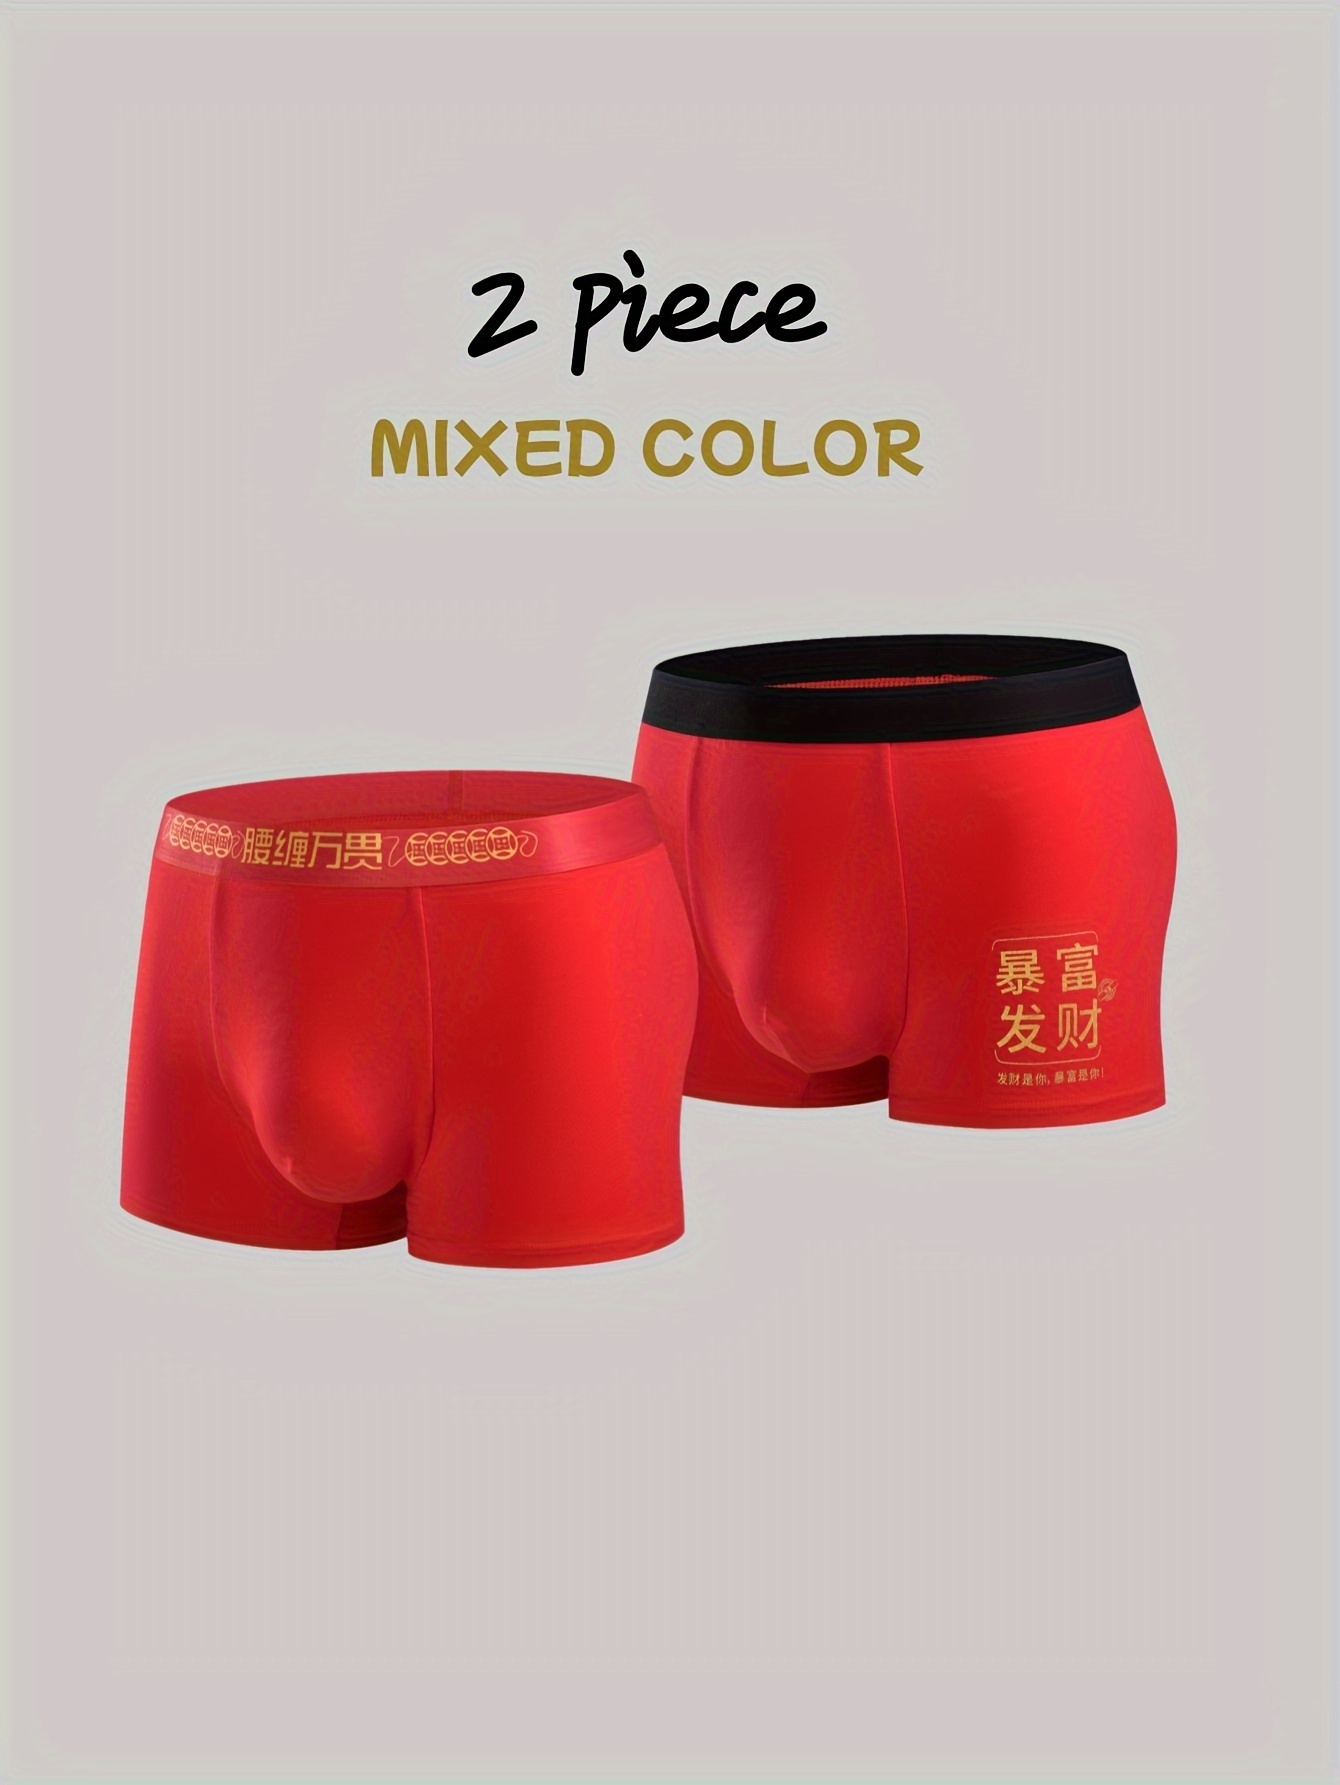 Men Boxers New Year Style Good Fortune Mid Waist Red Festive